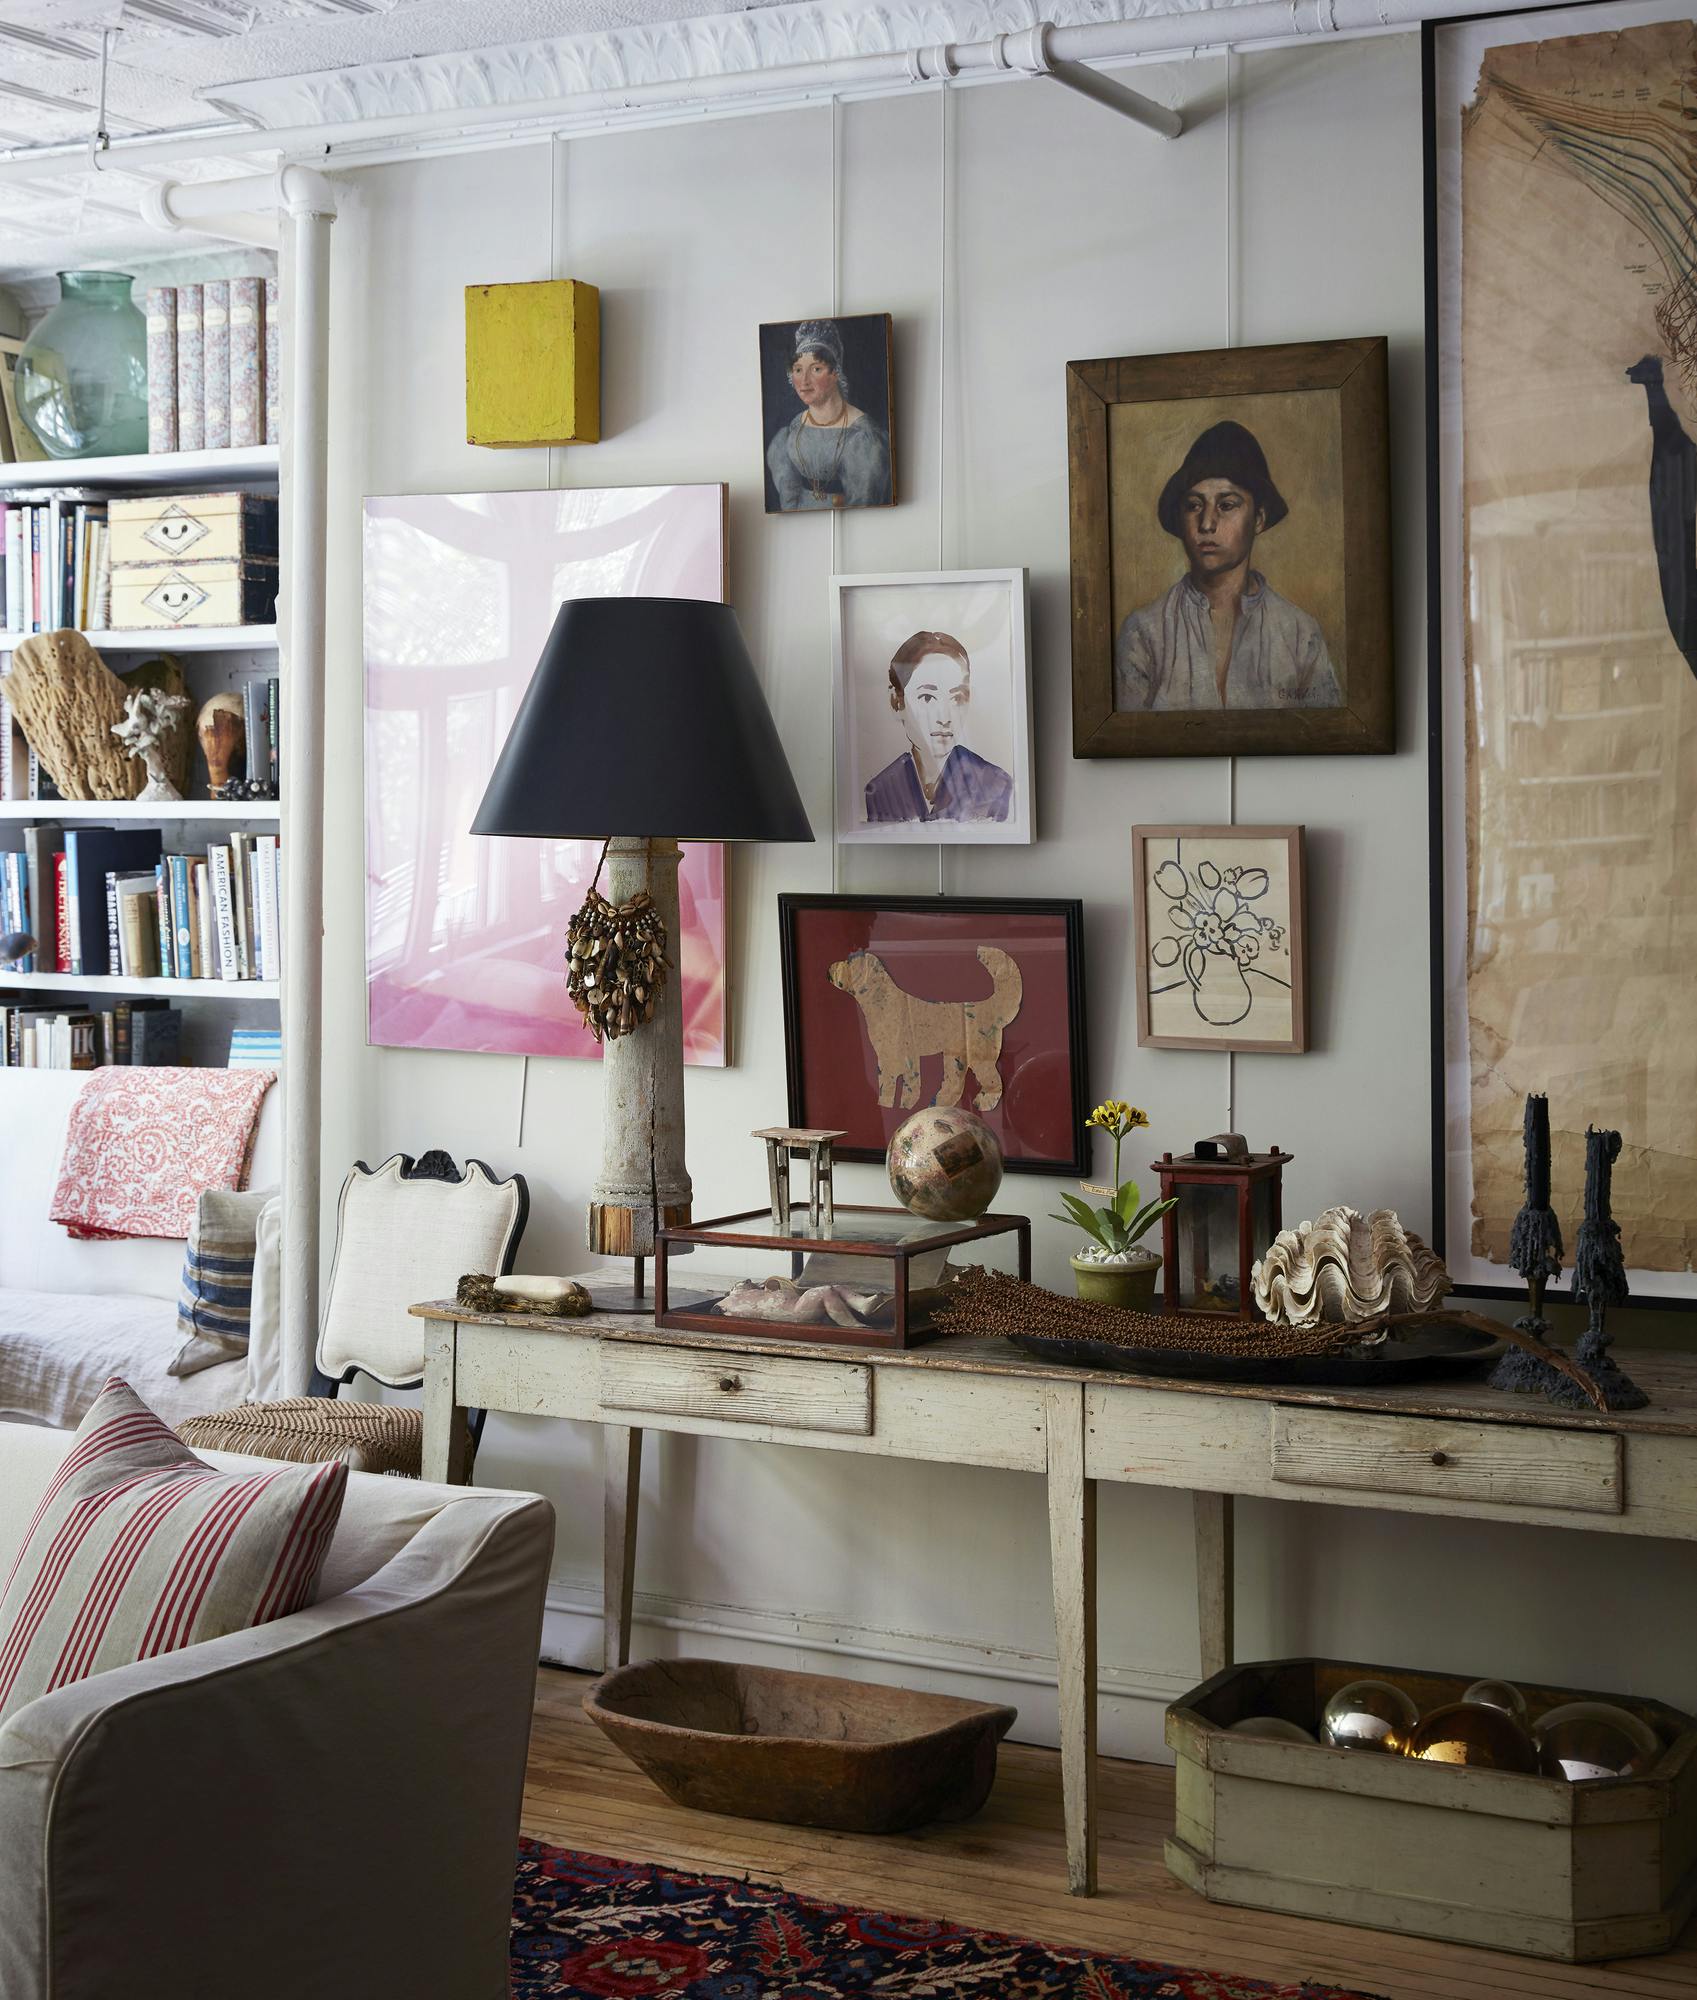 How a pro decorates with antiques and flea market finds